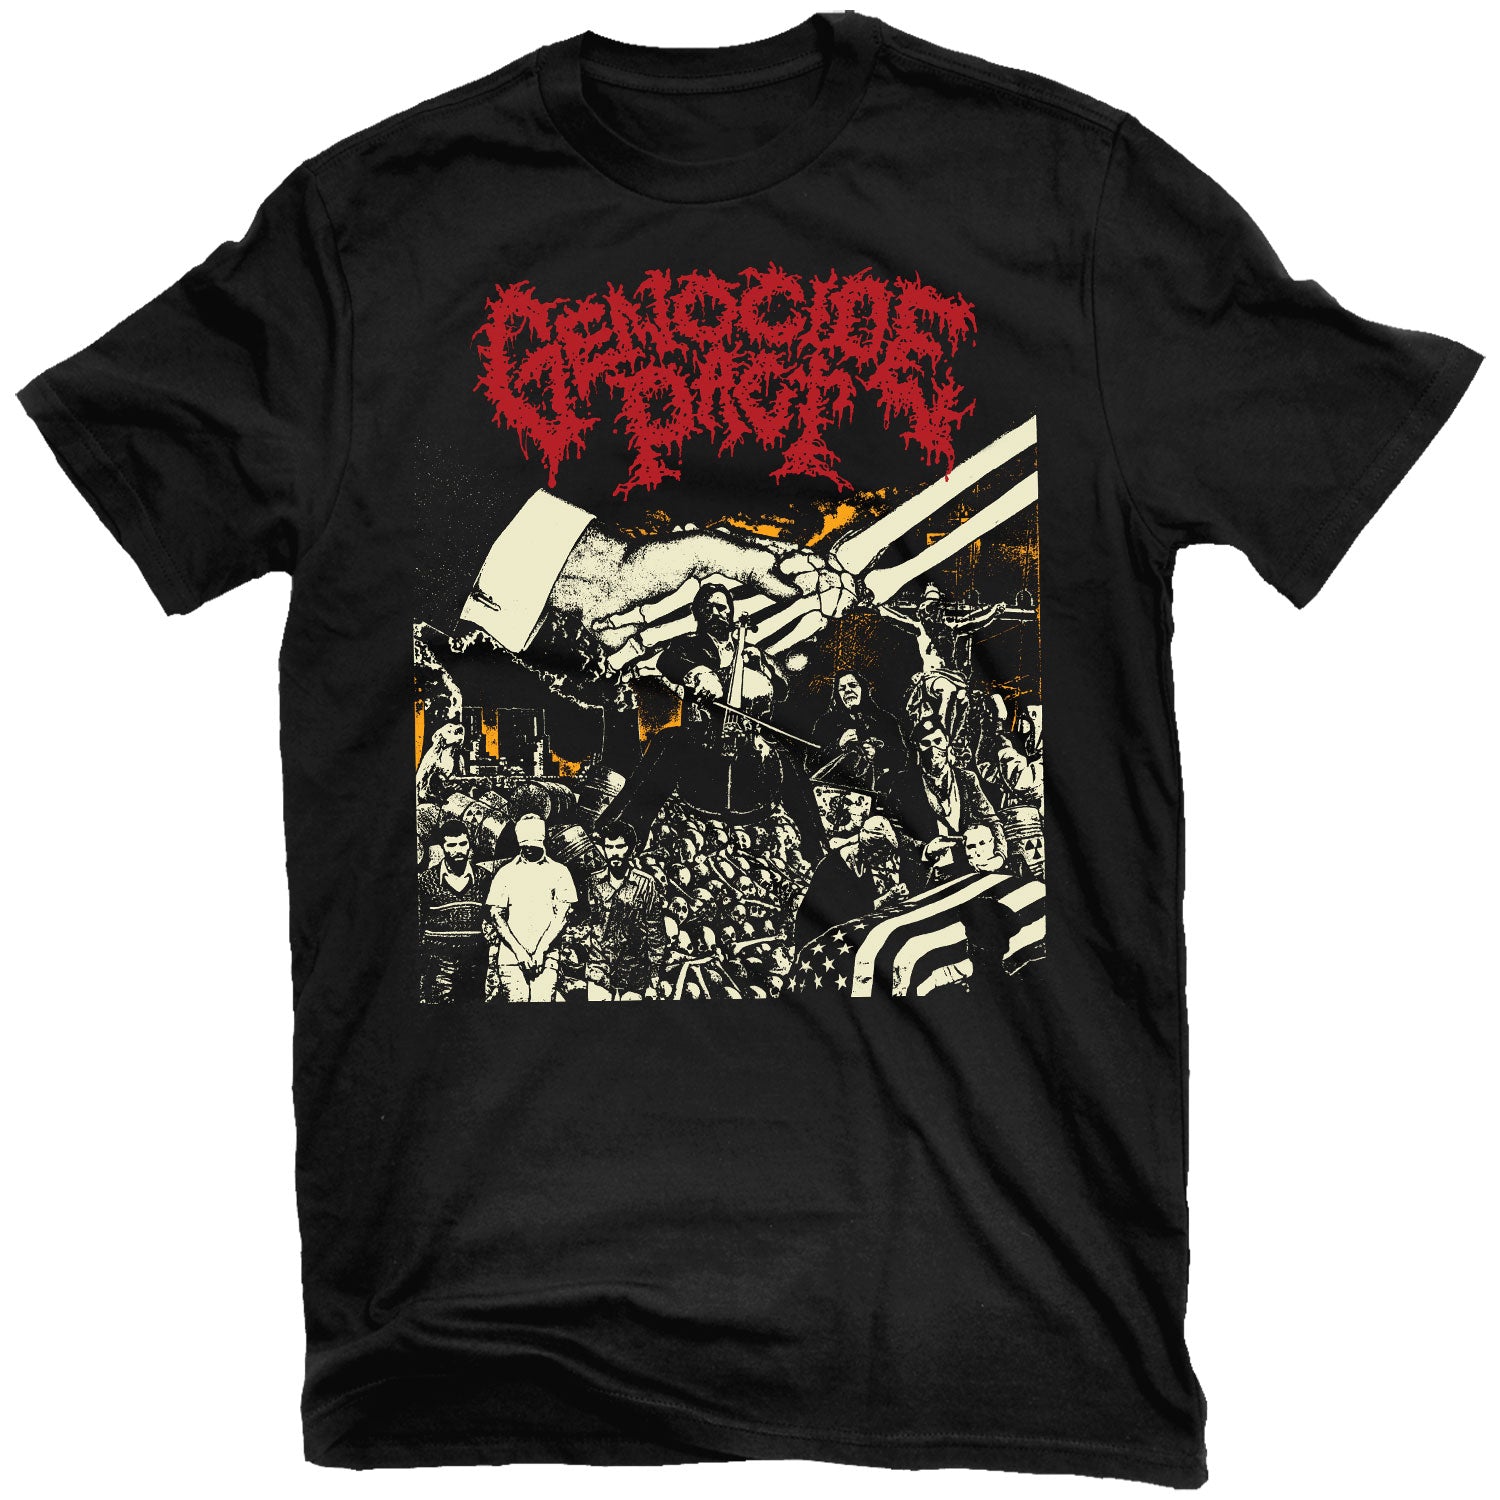 Genocide Pact "Genocide Pact" T-Shirt